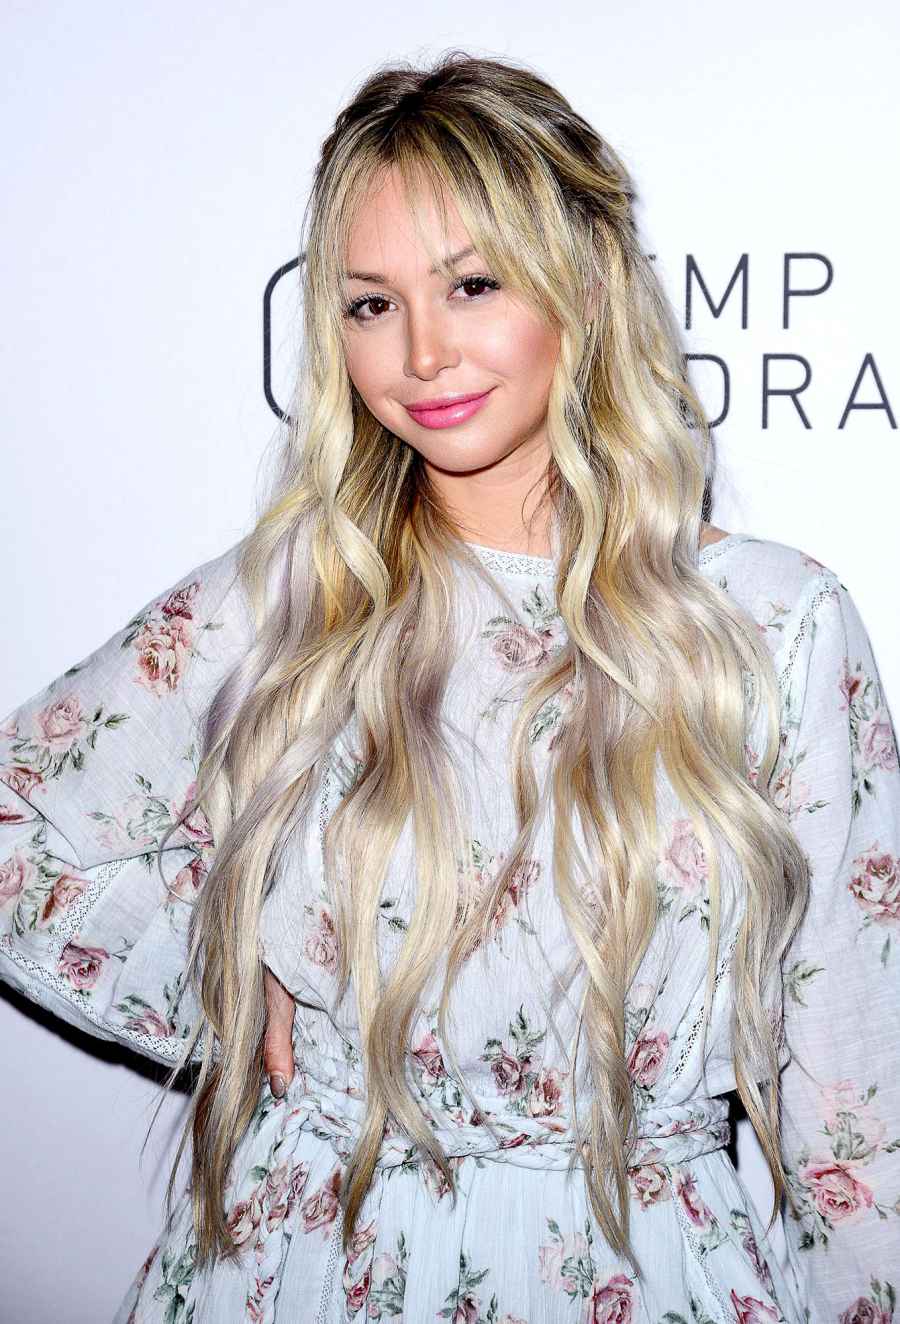 Corinne Olympios Bachelor Nation Weighs in on Tyler and Gigi